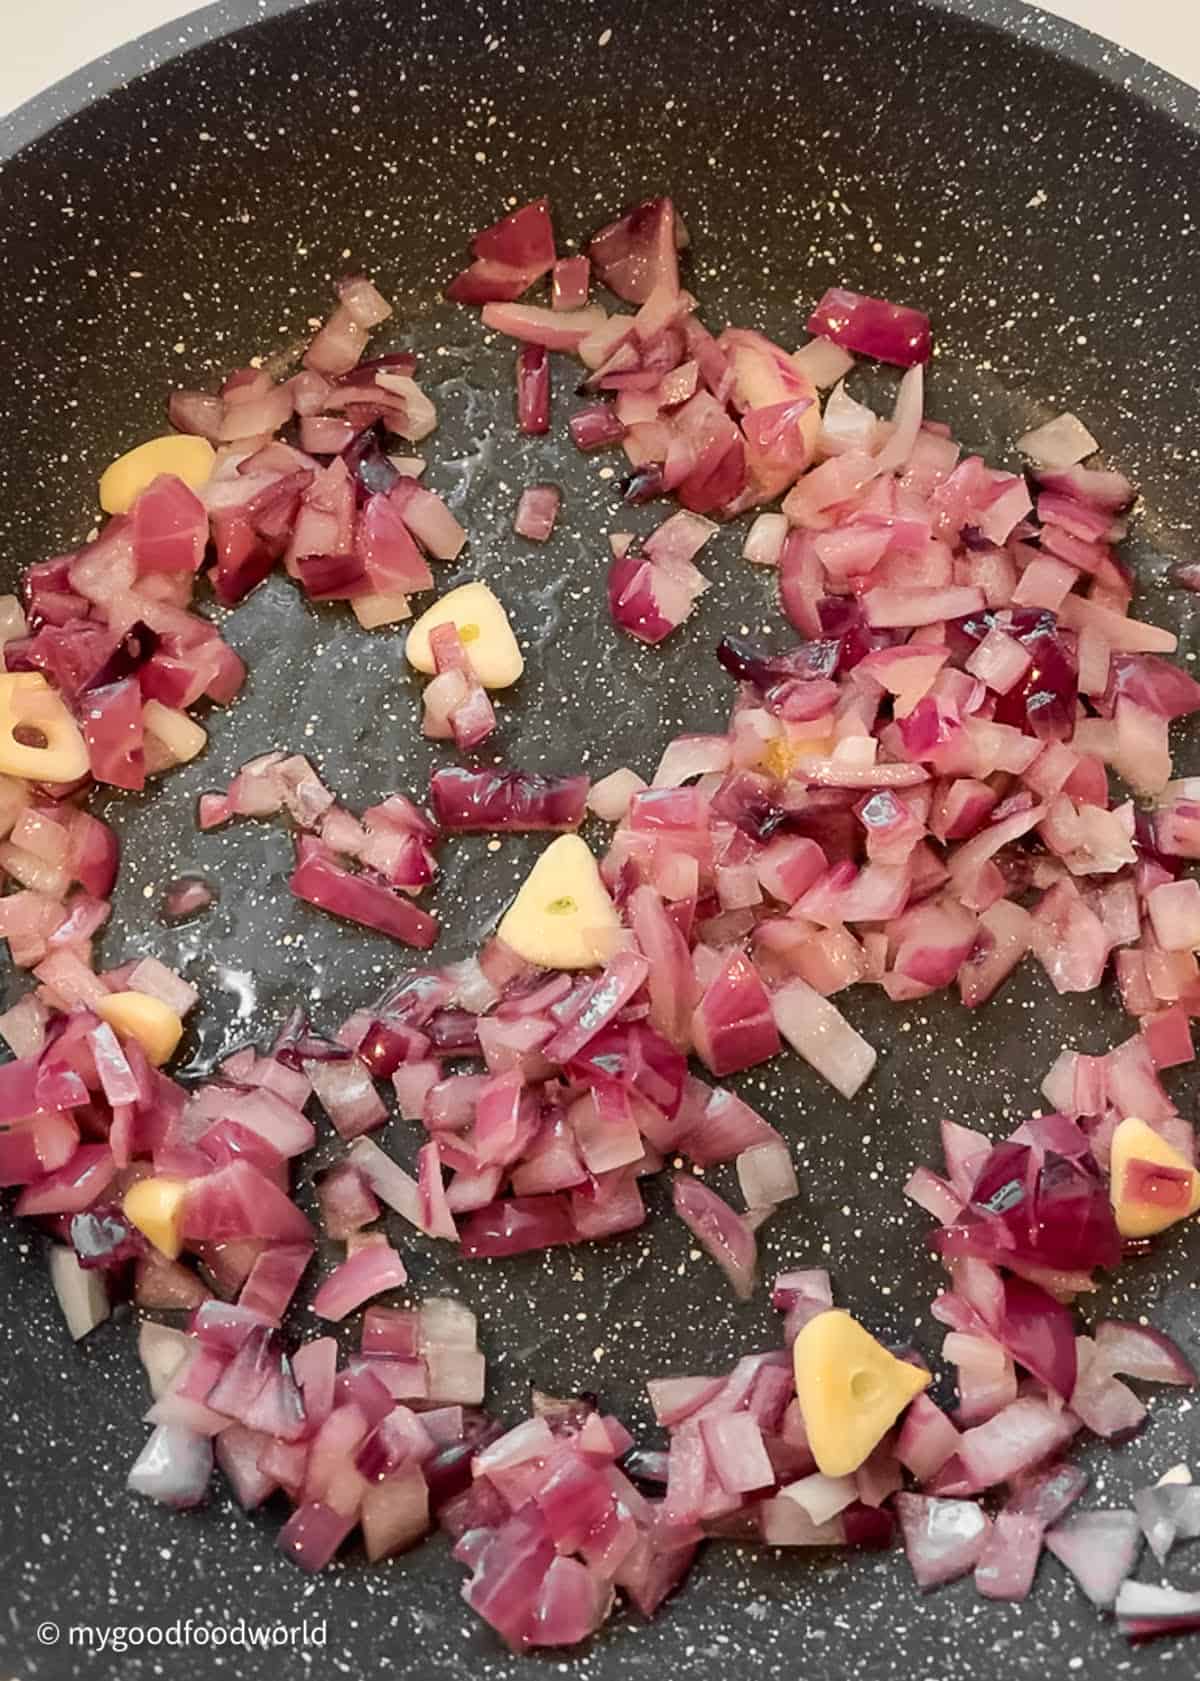 Finely chopped onions and garlic are frying in a dark grey skillet. The red onions are looking pale as they are frying.